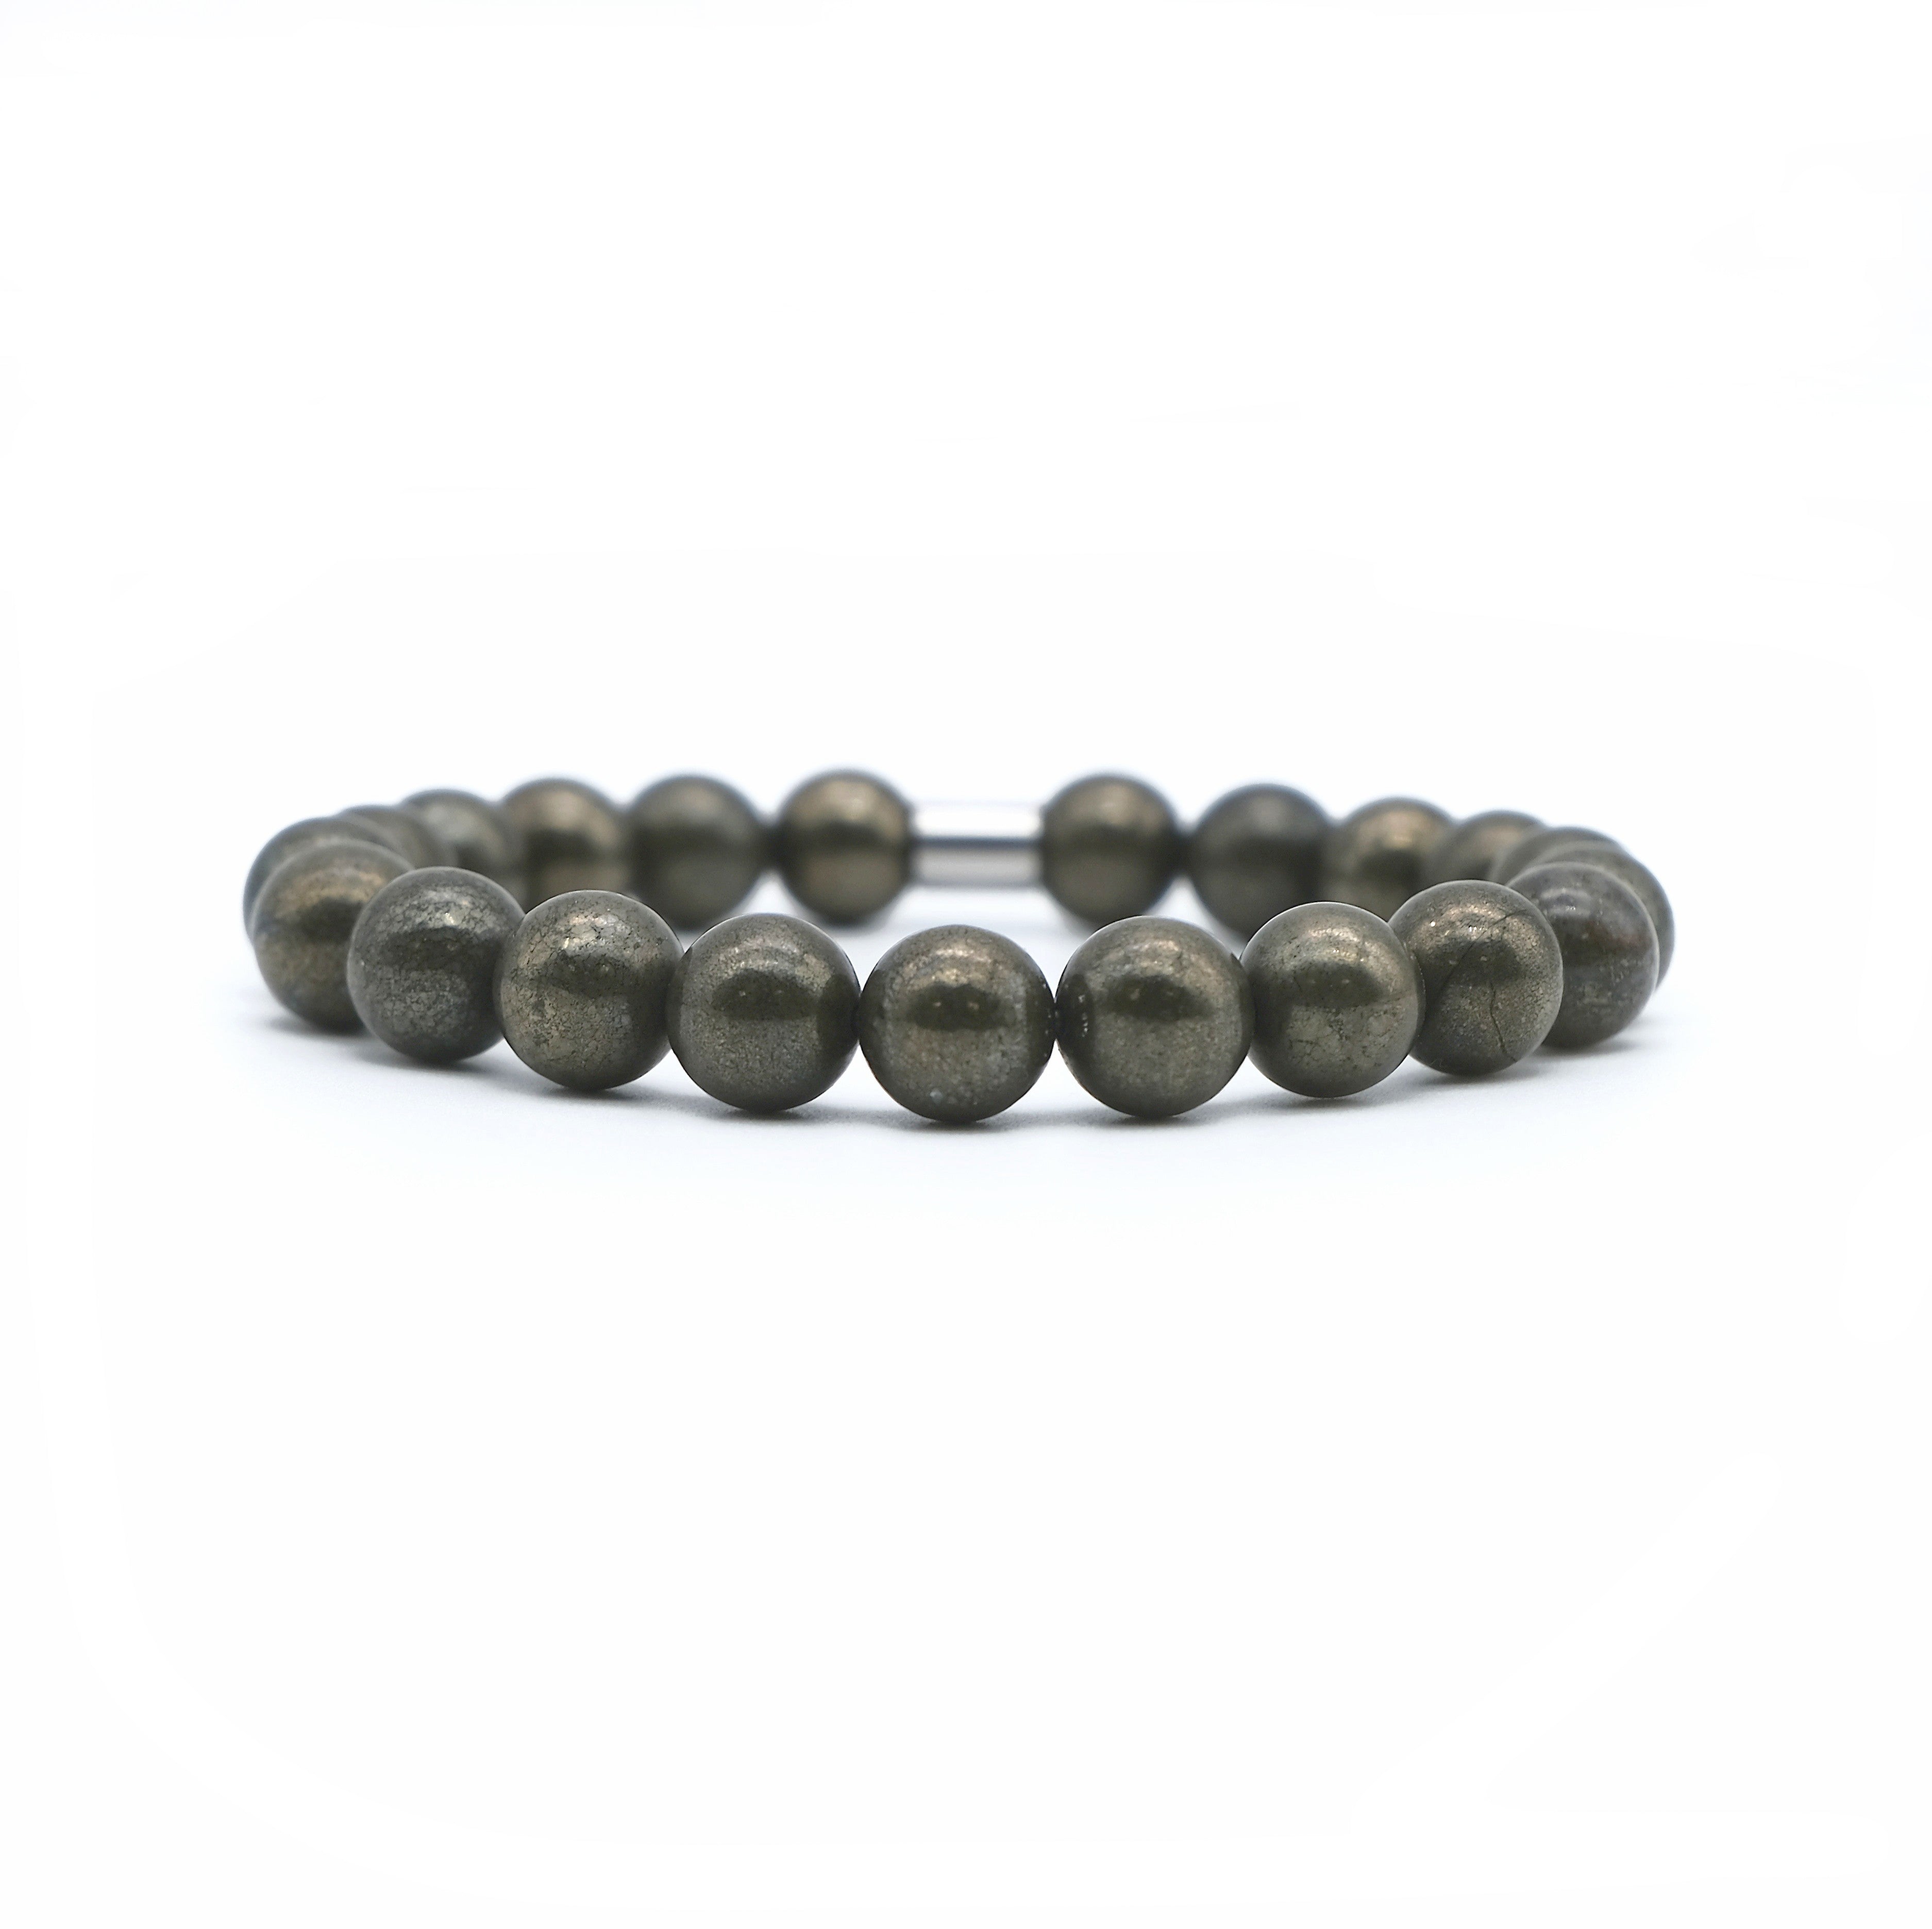 pyrite gemstone bracelet in 10mm beads with stainless steel column bead